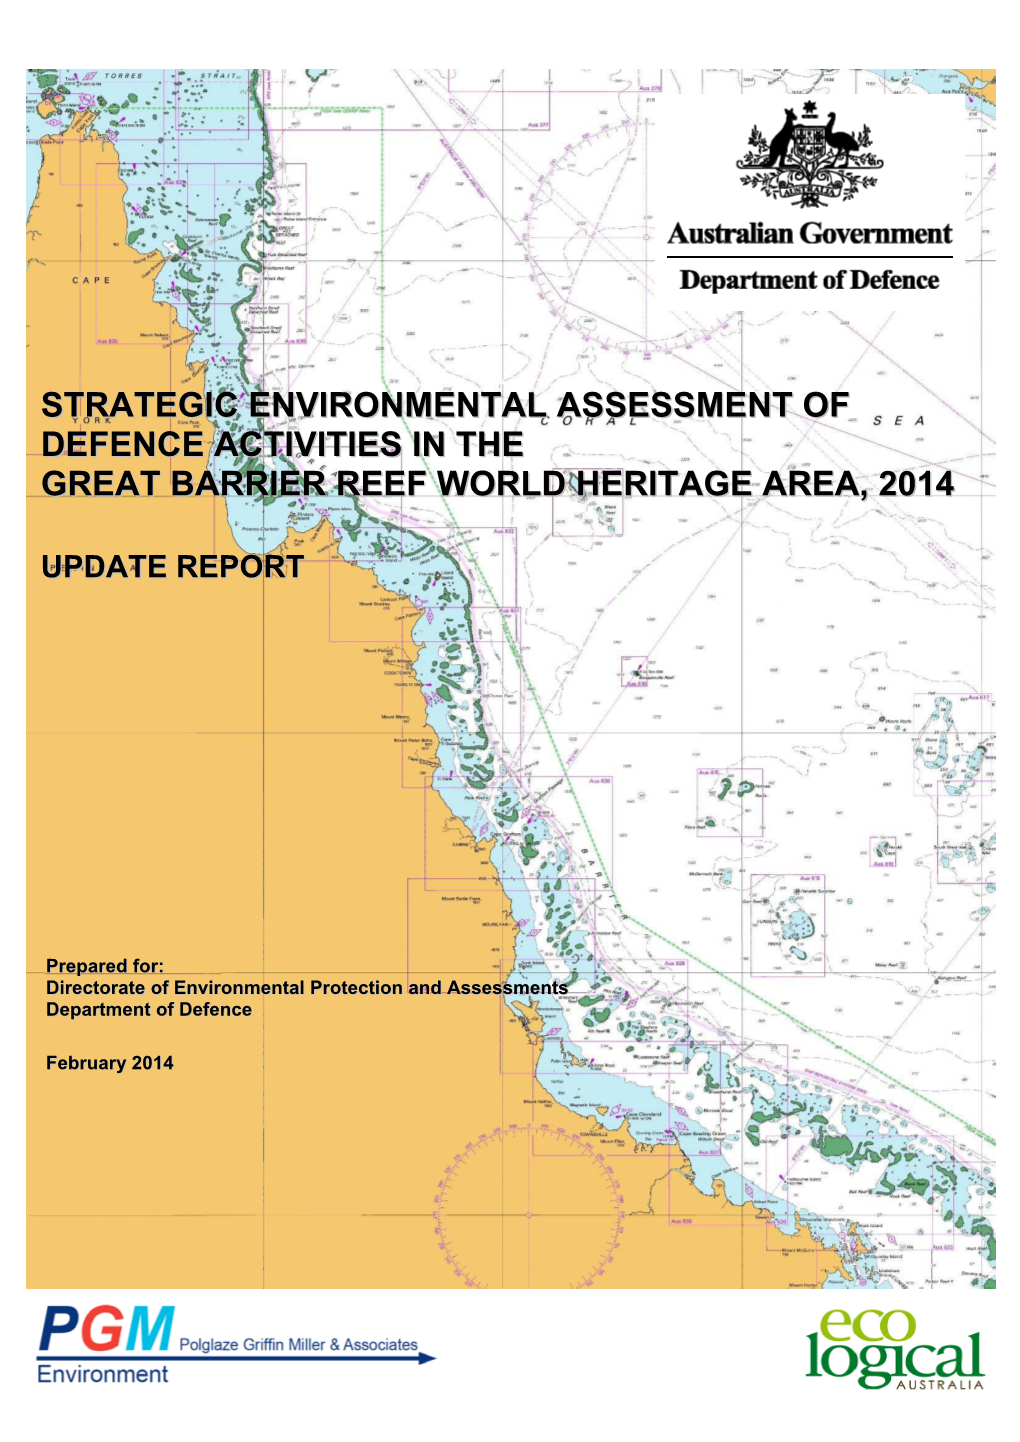 Strategic Environmental Assessment of Defence Activities in the Great Barrier Reef World Heritage Area, 2014